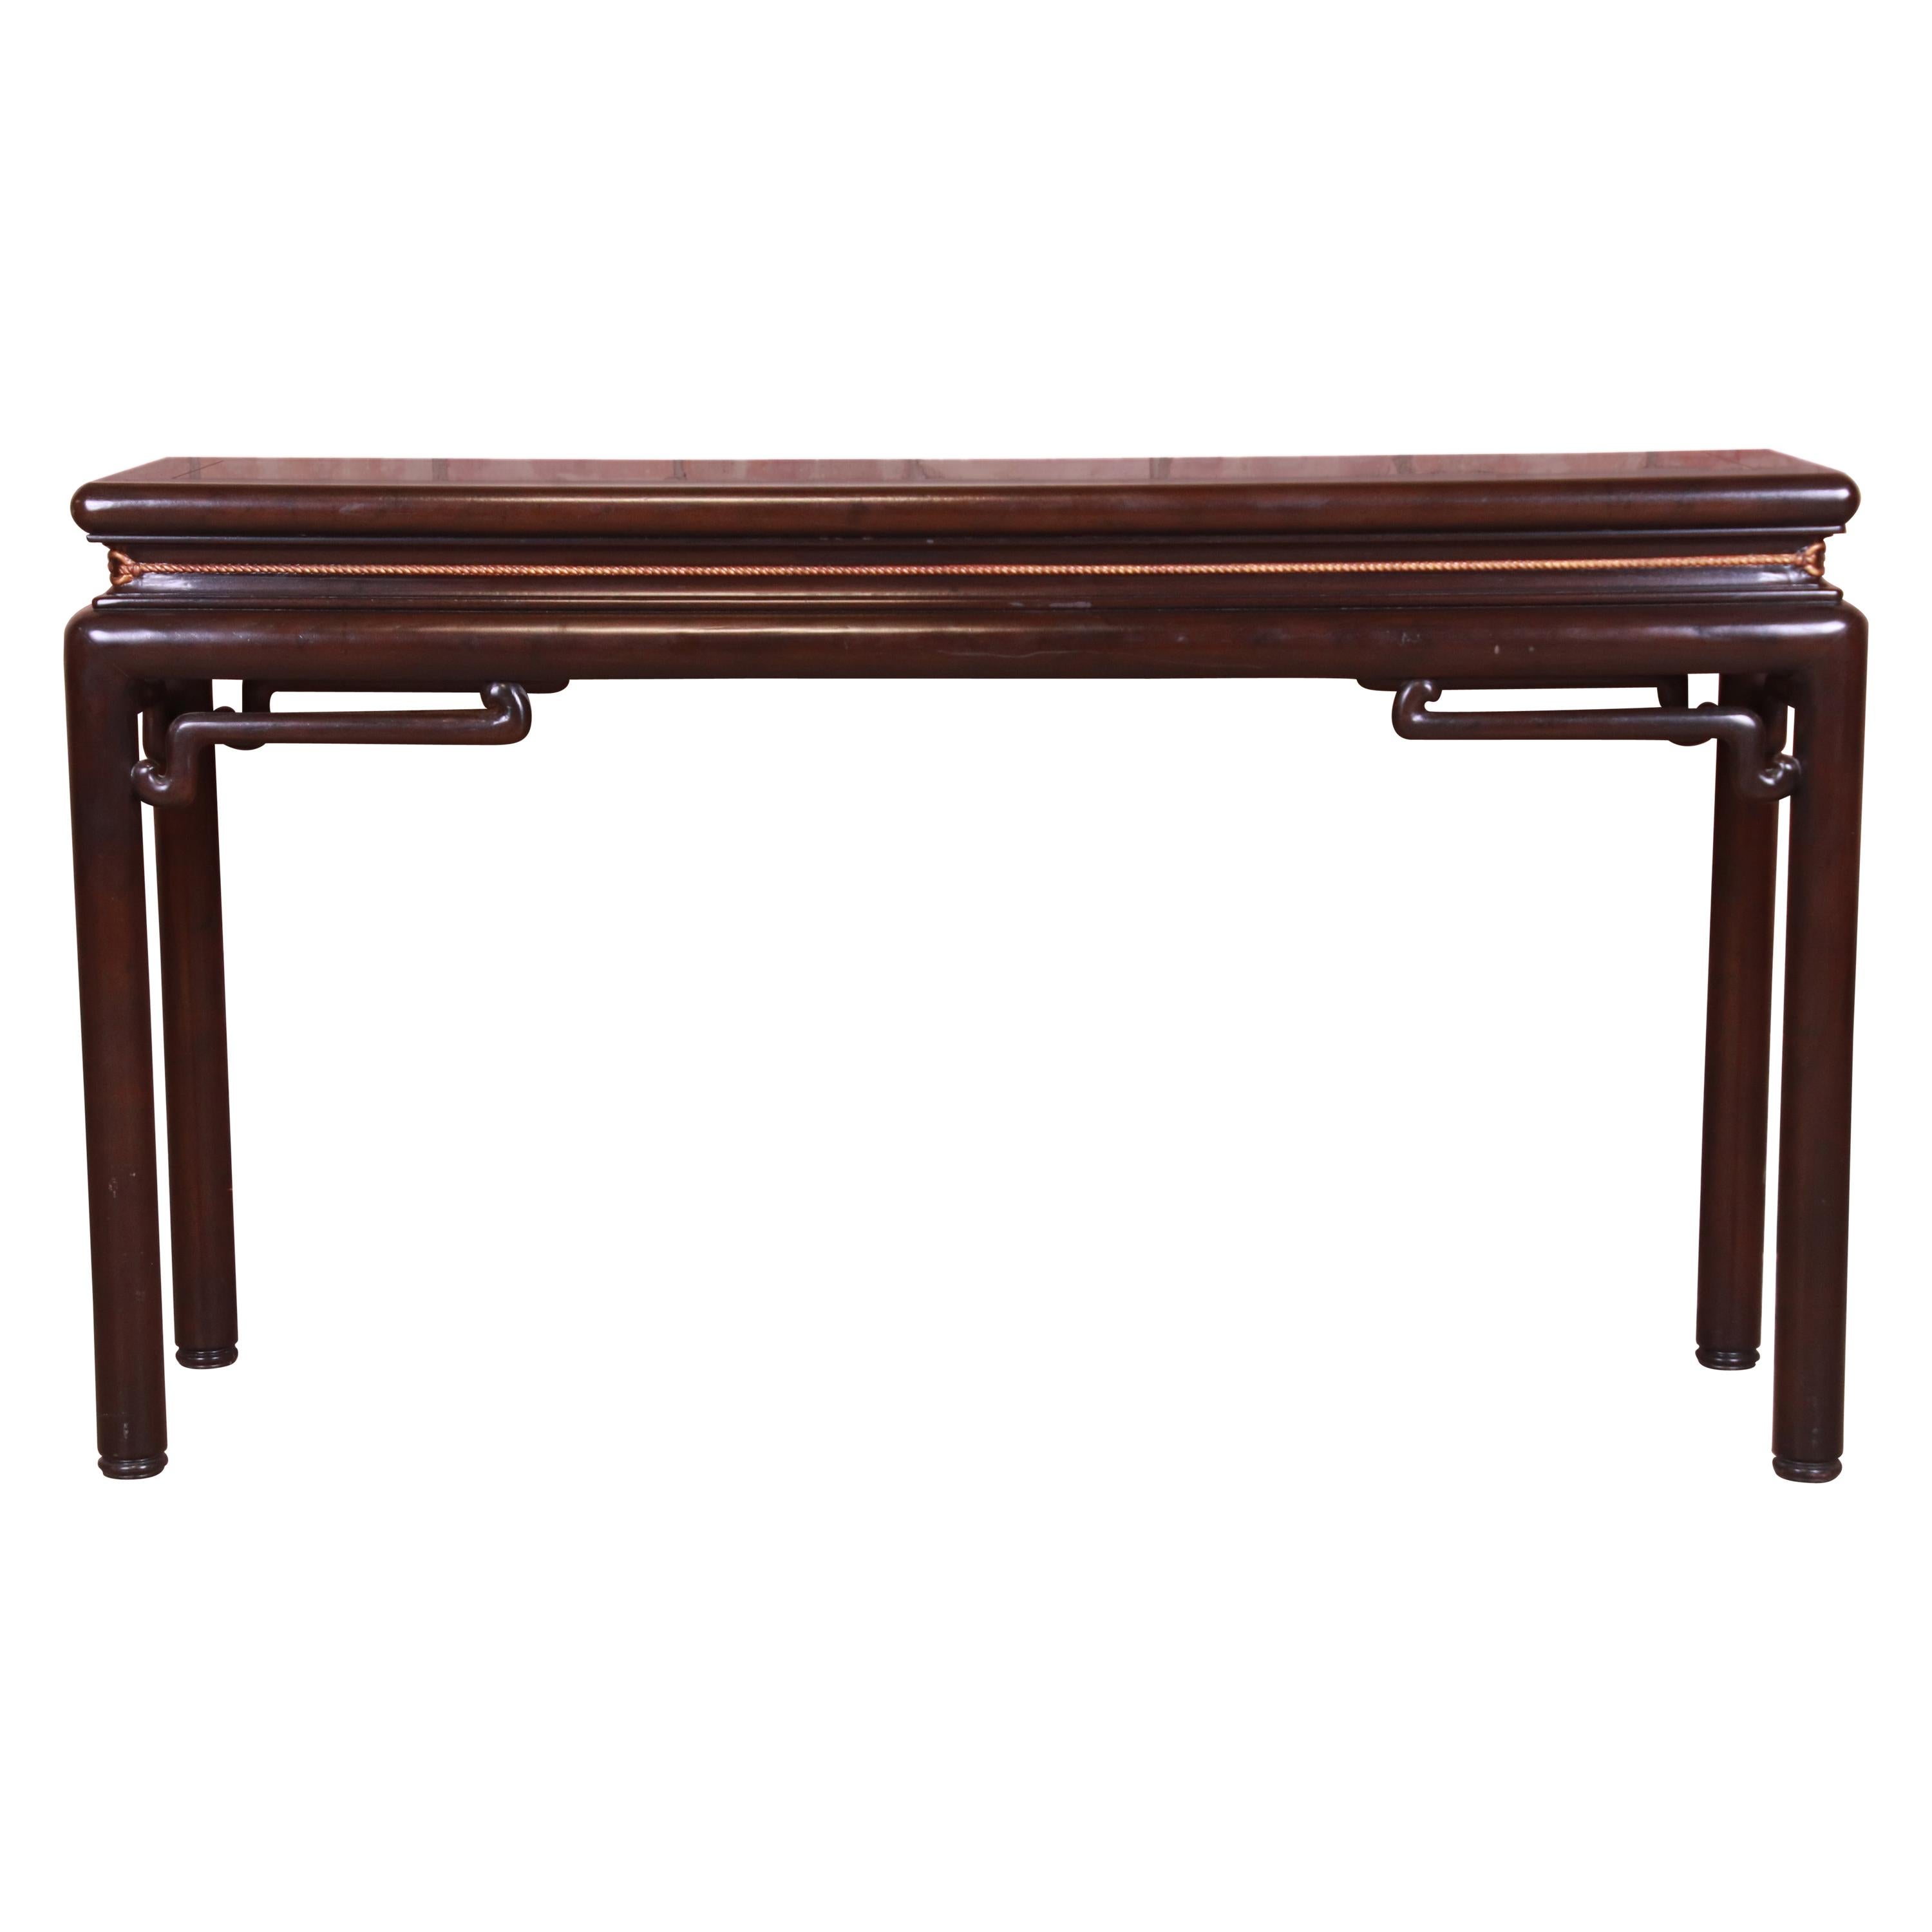 Baker Furniture Hollywood Regency Chinoiserie Walnut Console Table, Circa 1970s